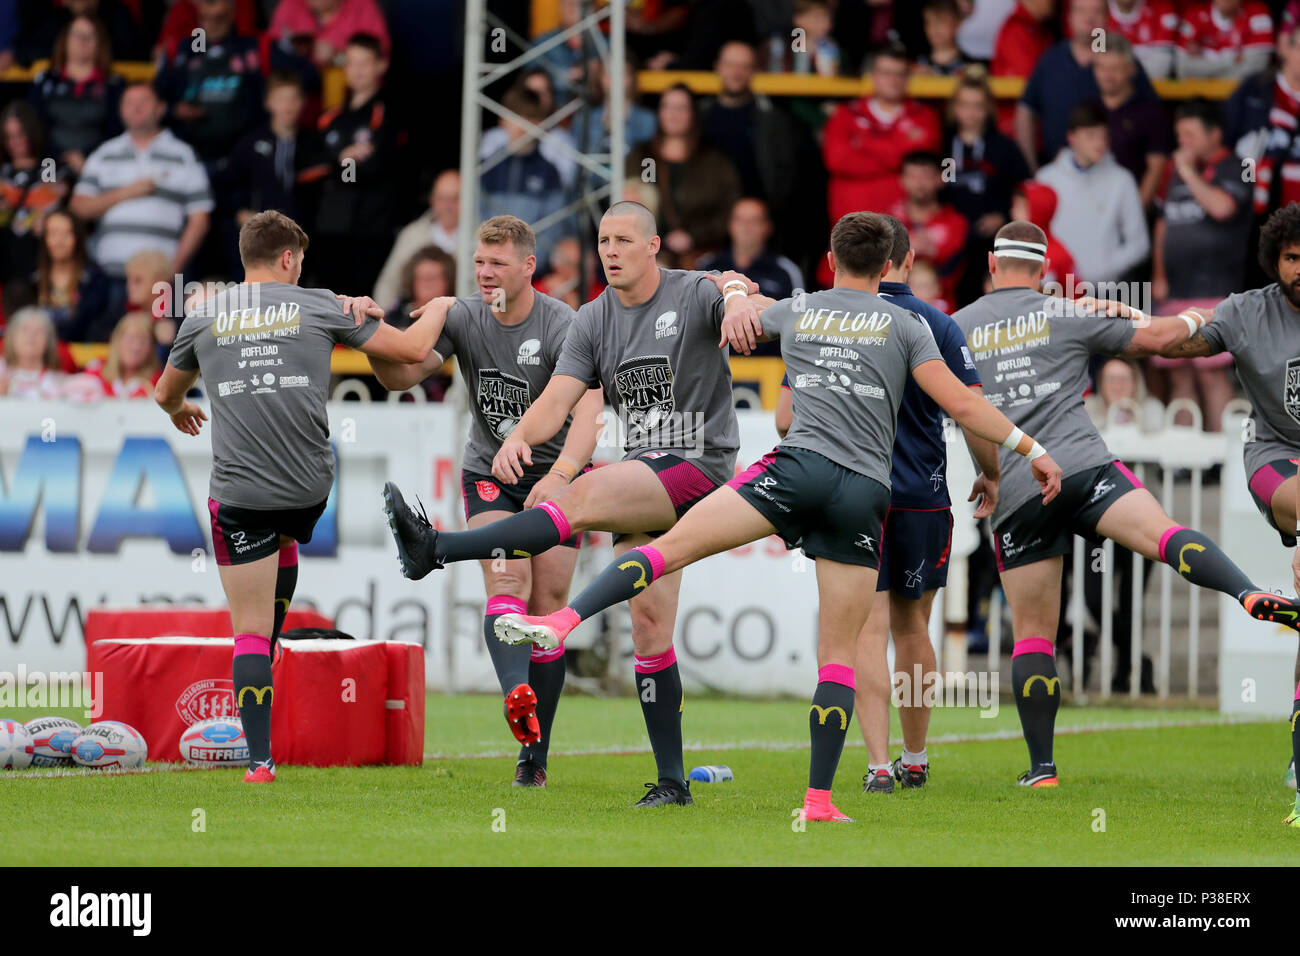 Hull KR players warm up with Offload state of mind tshirts during the Betfred Super League match at the Mend-A-Hose Jungle, Casteford. Stock Photo